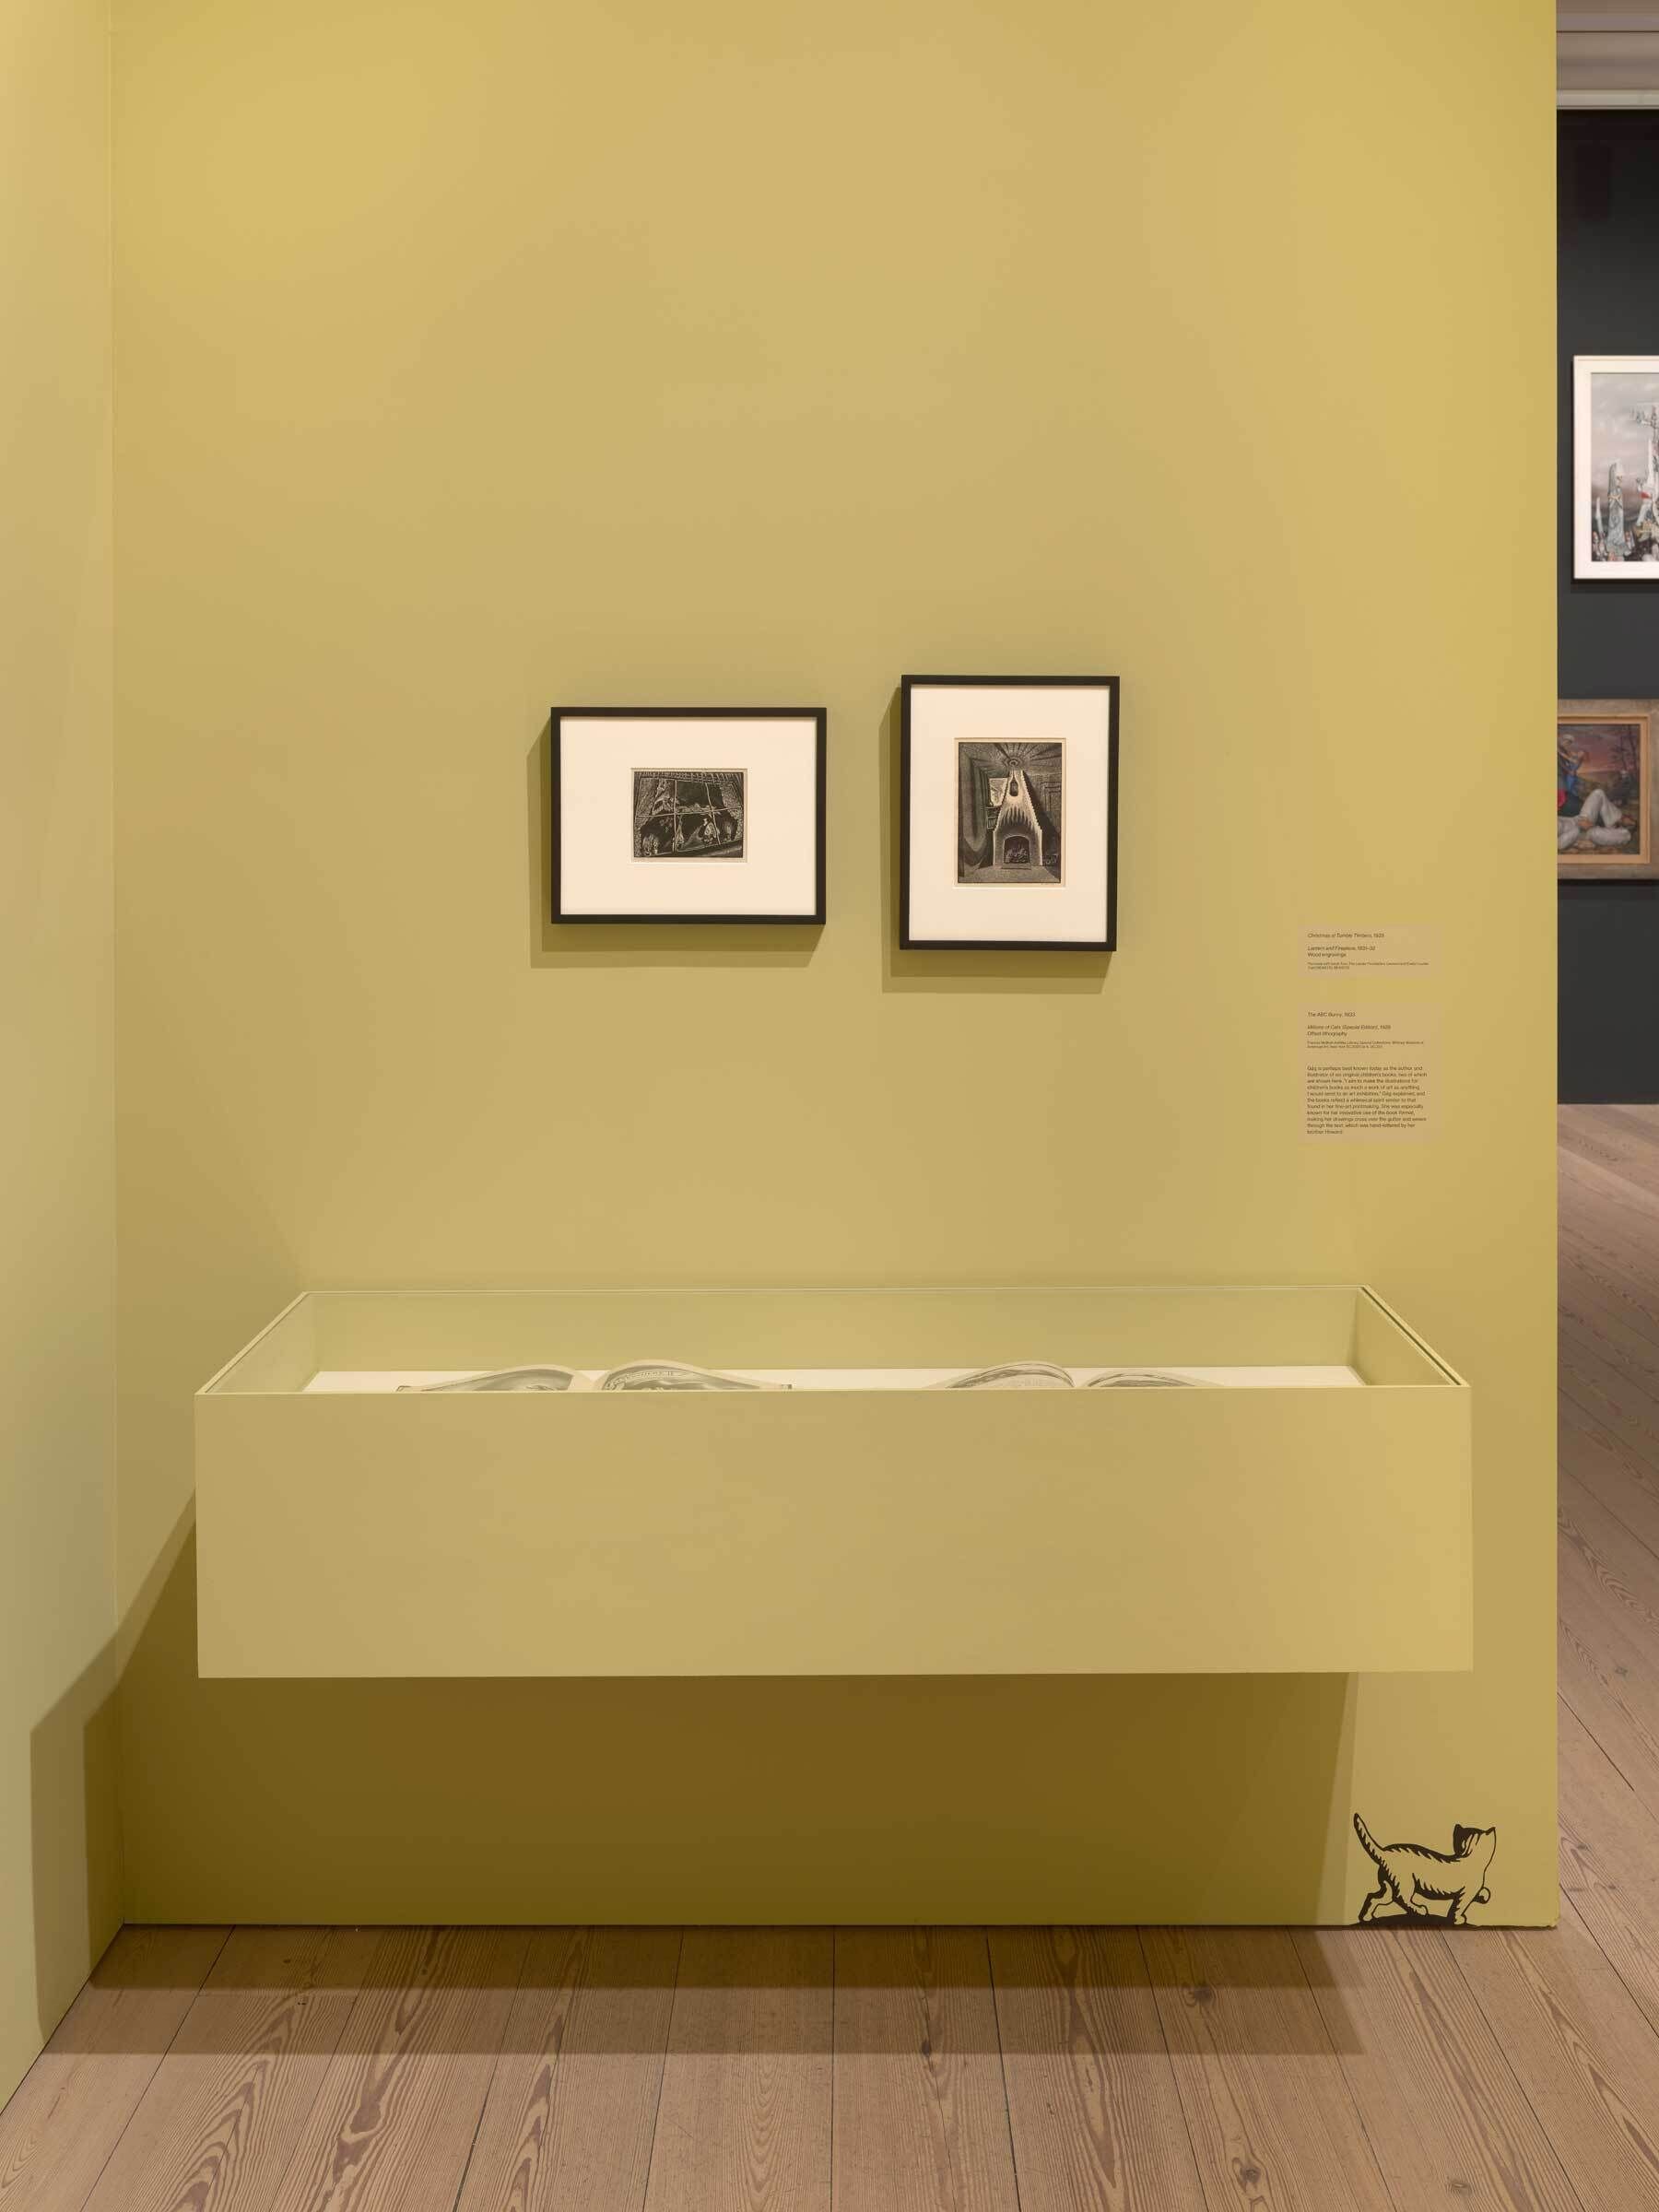 Two framed artworks on a mustard-colored gallery wall above a white bench with a small cat illustration near the floor.